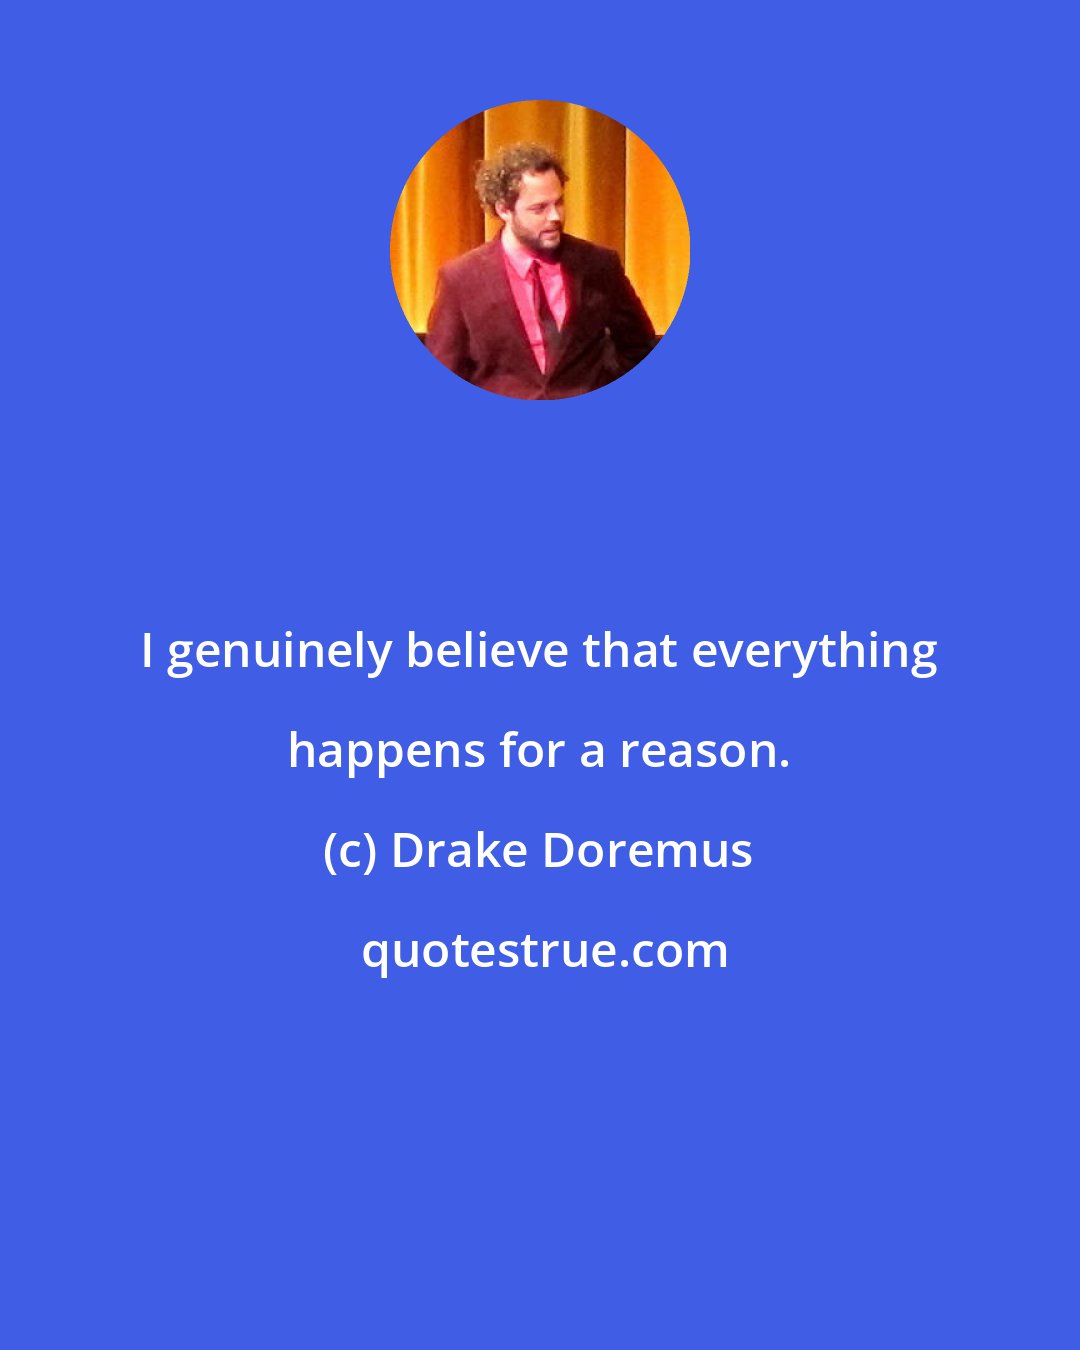 Drake Doremus: I genuinely believe that everything happens for a reason.